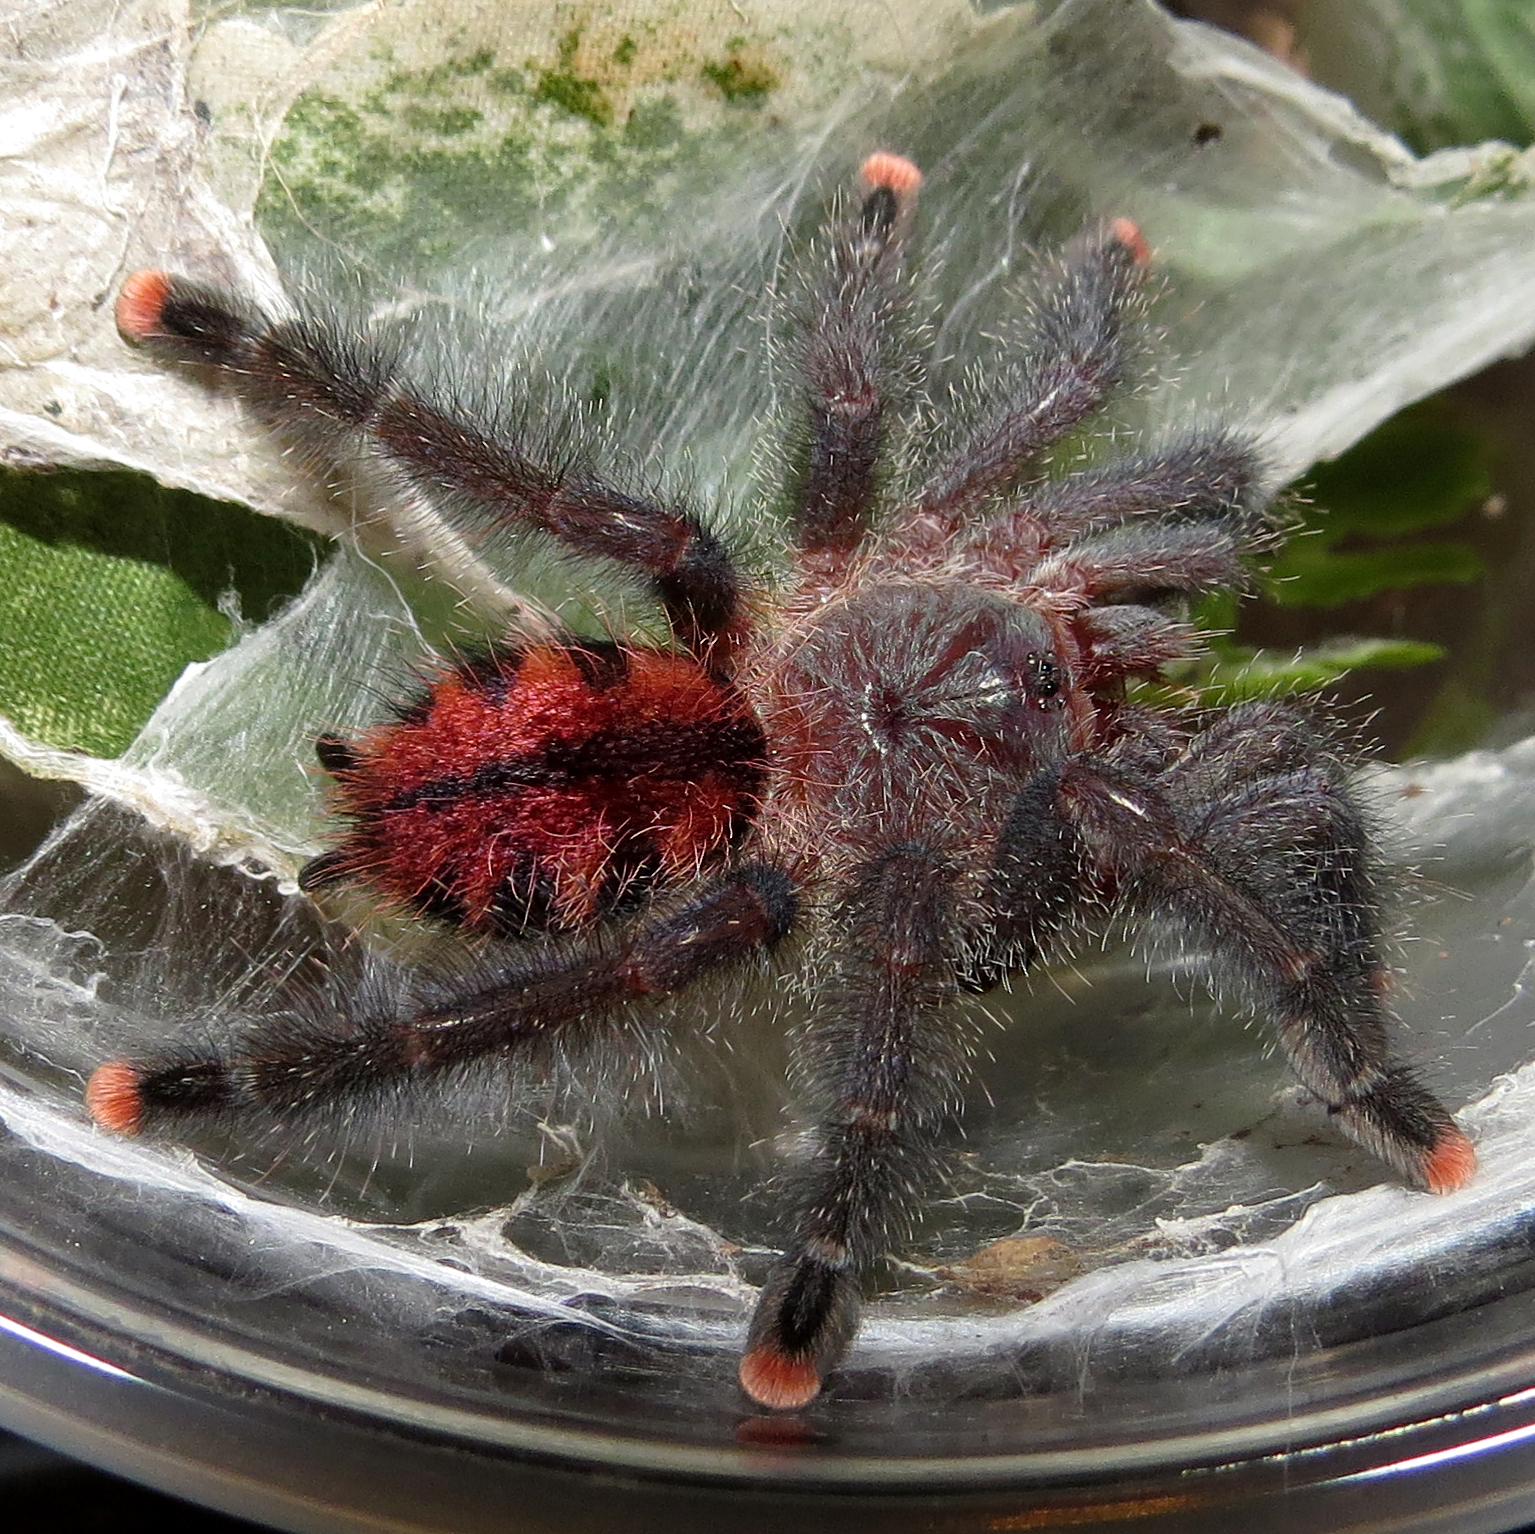 After the Hunt (♀ Avicularia avicularia 2.75")